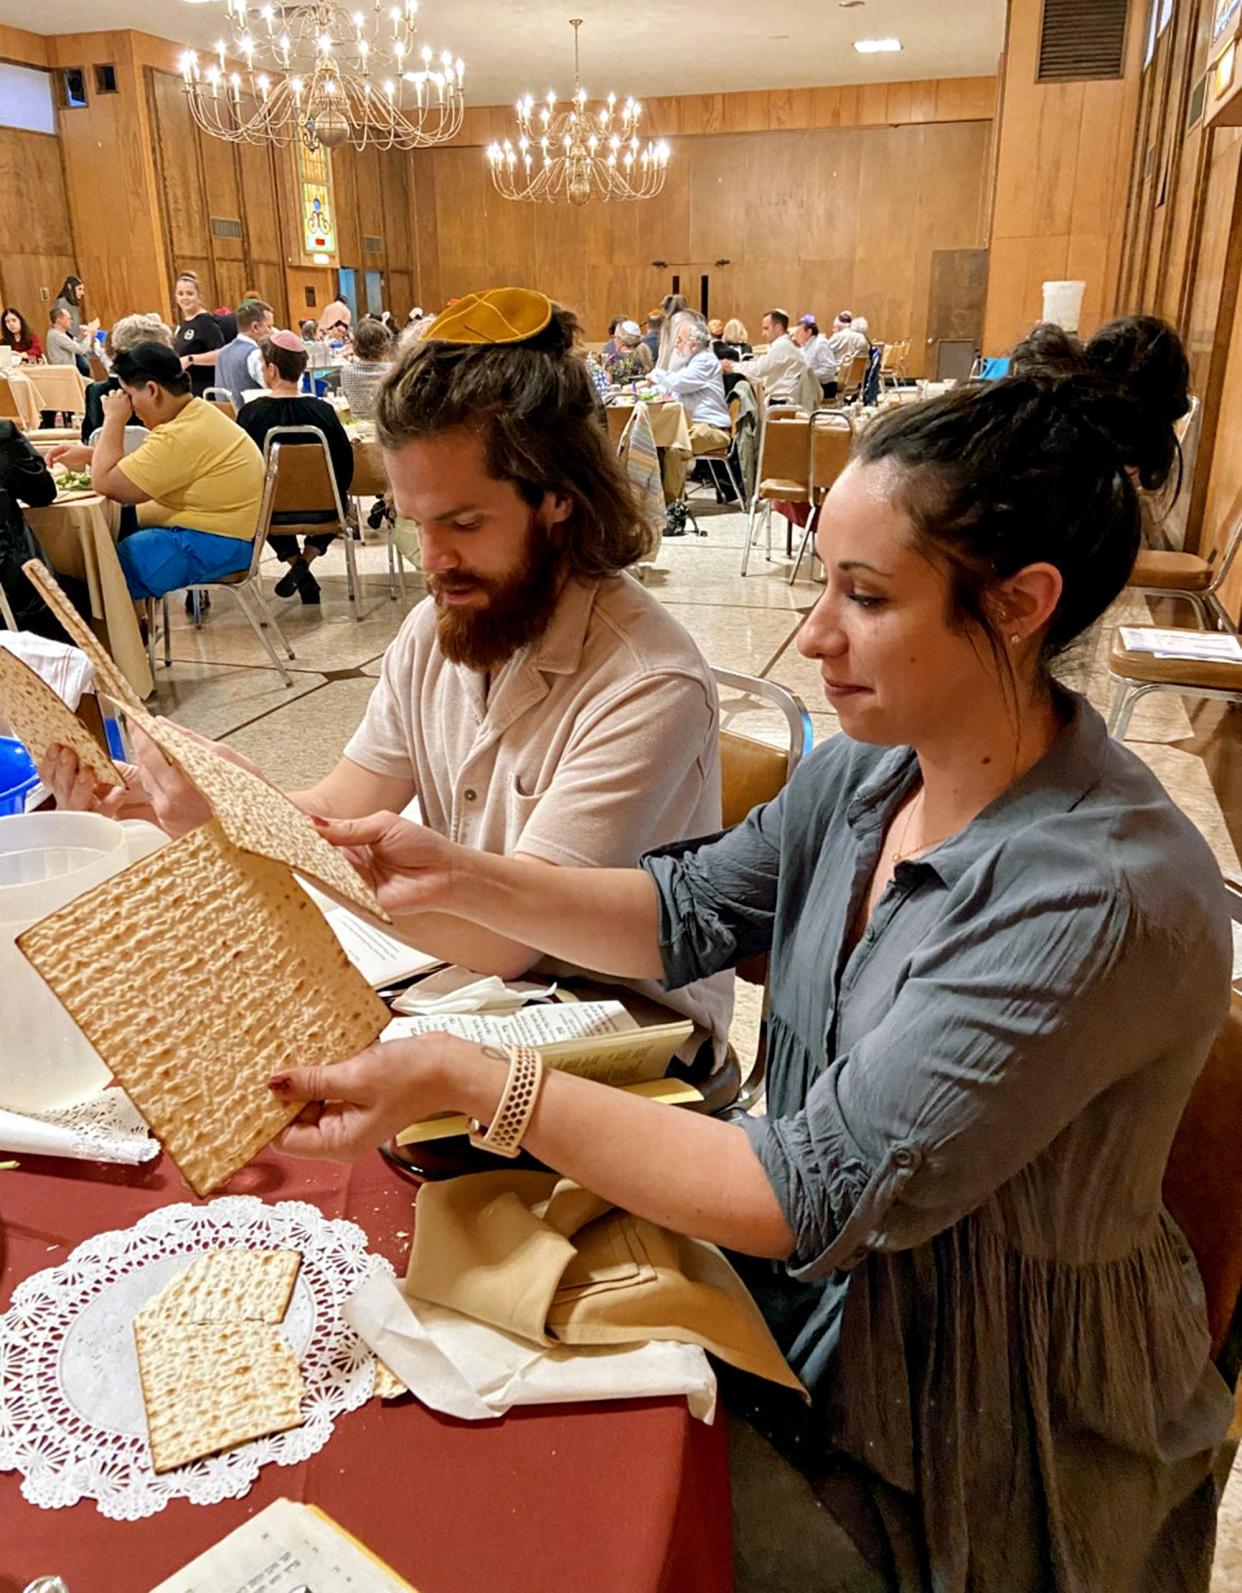 Debra Bishop, with her husband David Bishop nearby, prepares to break a piece of matzah during a Passover Seder on Wednesday at Emanuel Synagogue in Oklahoma City.